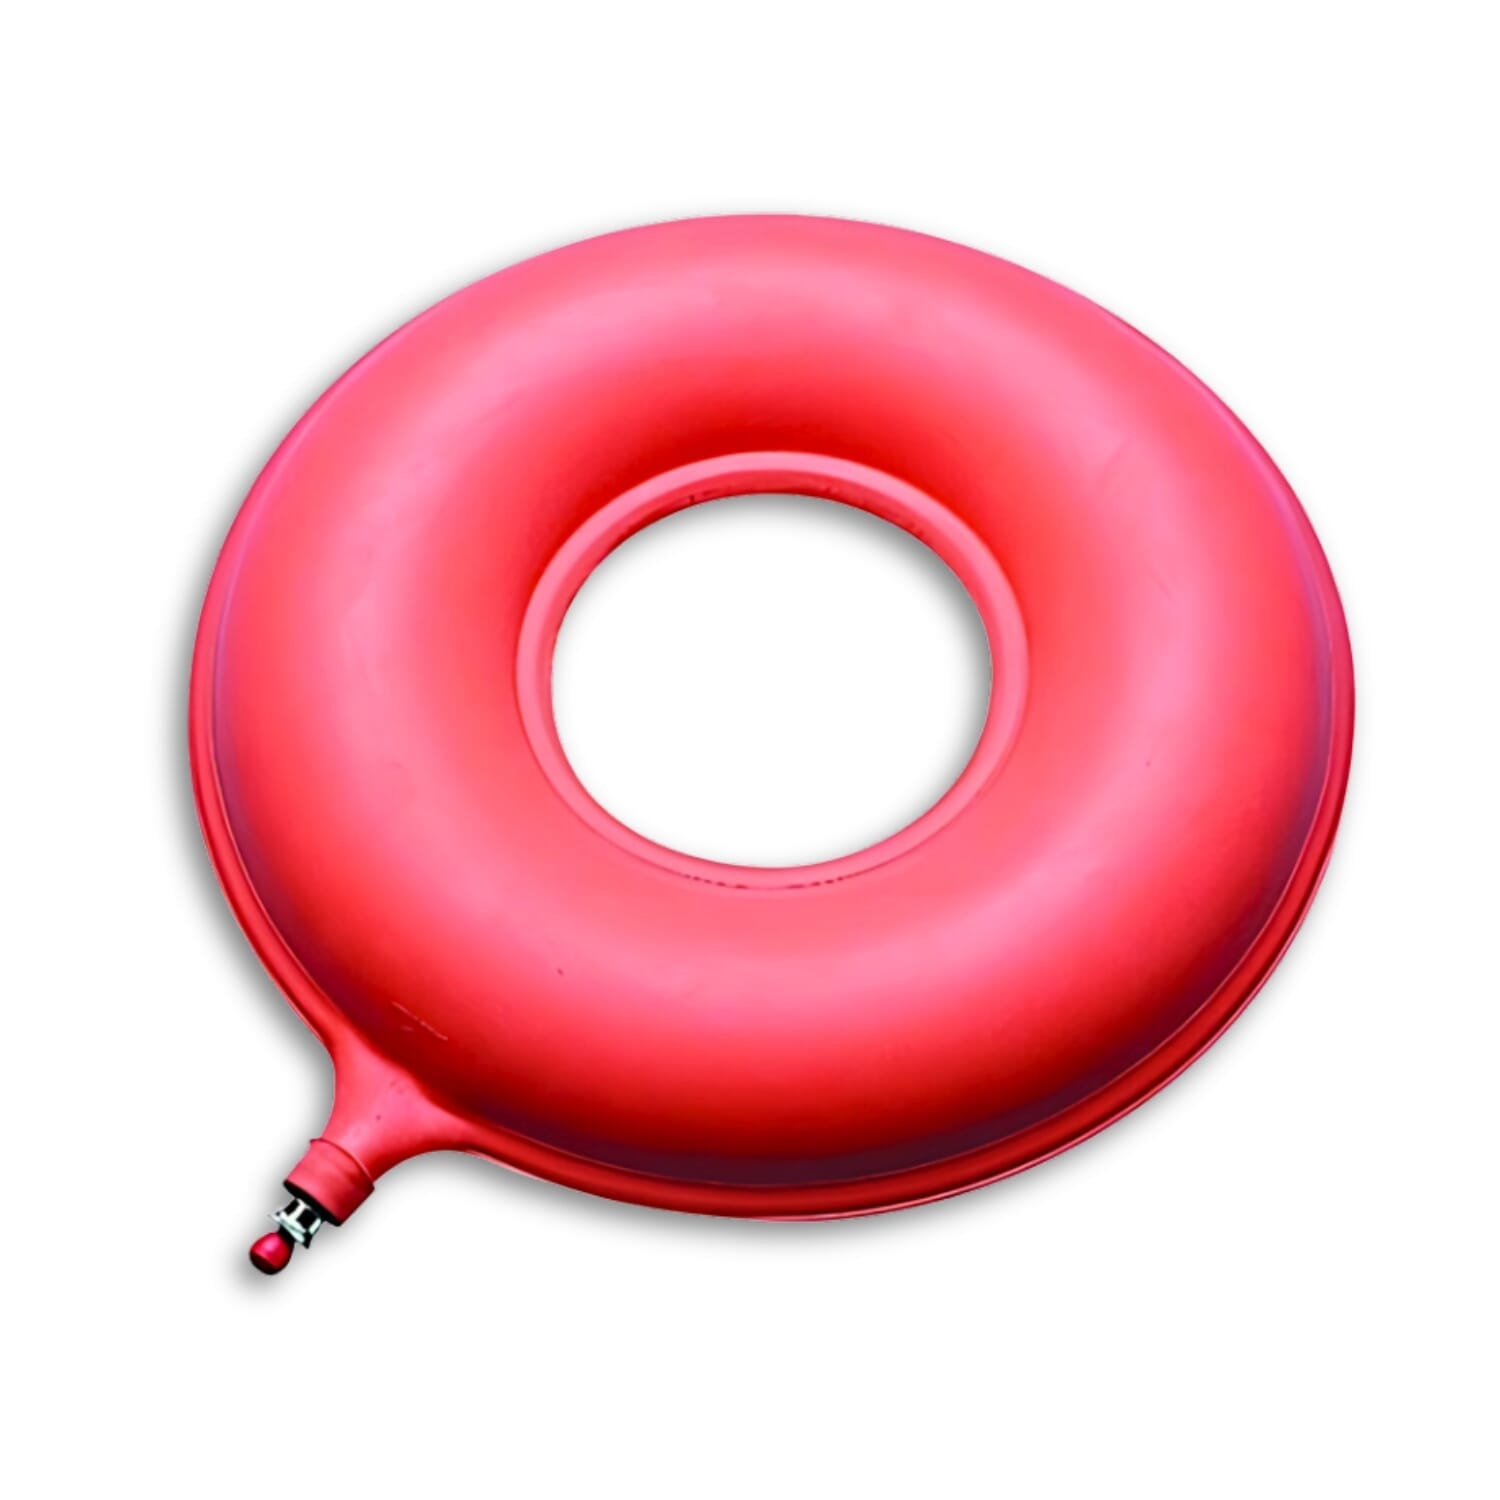 View Inflatable Rubber Ring 16 inches information